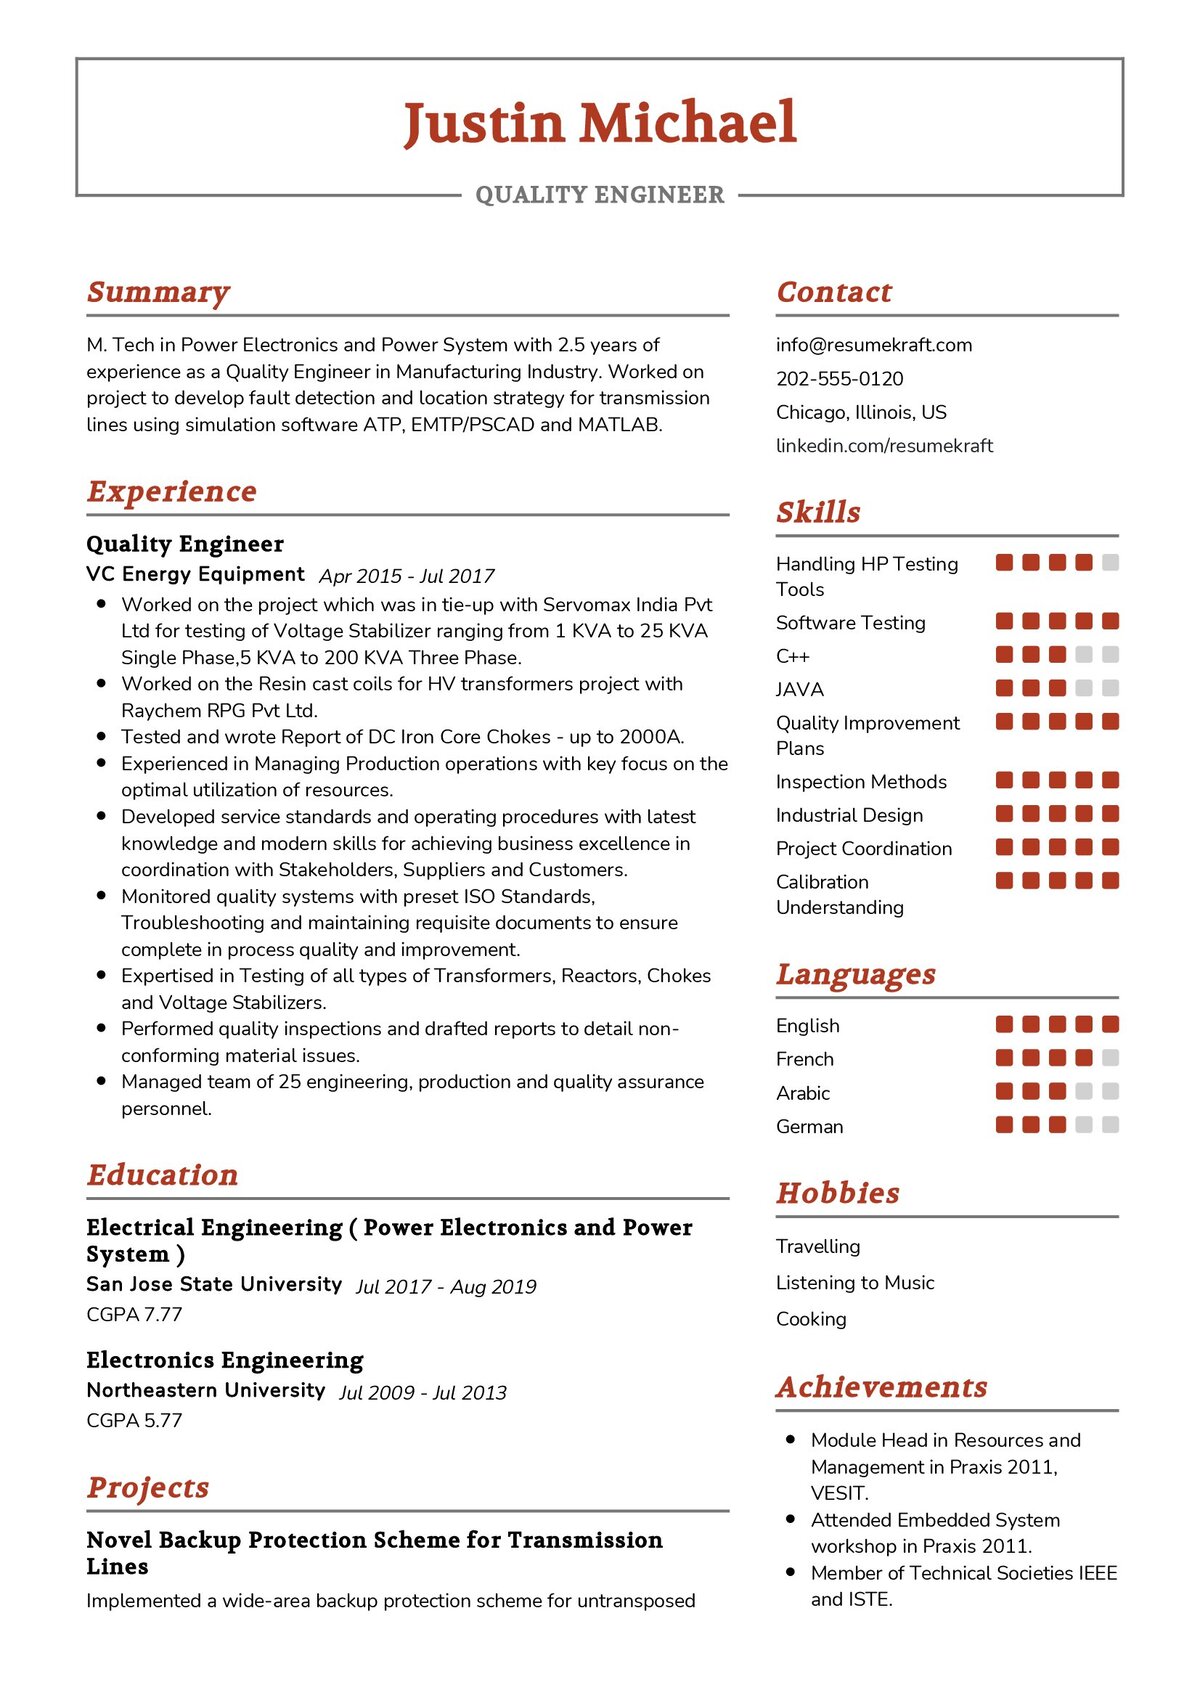 resume format for quality engineer